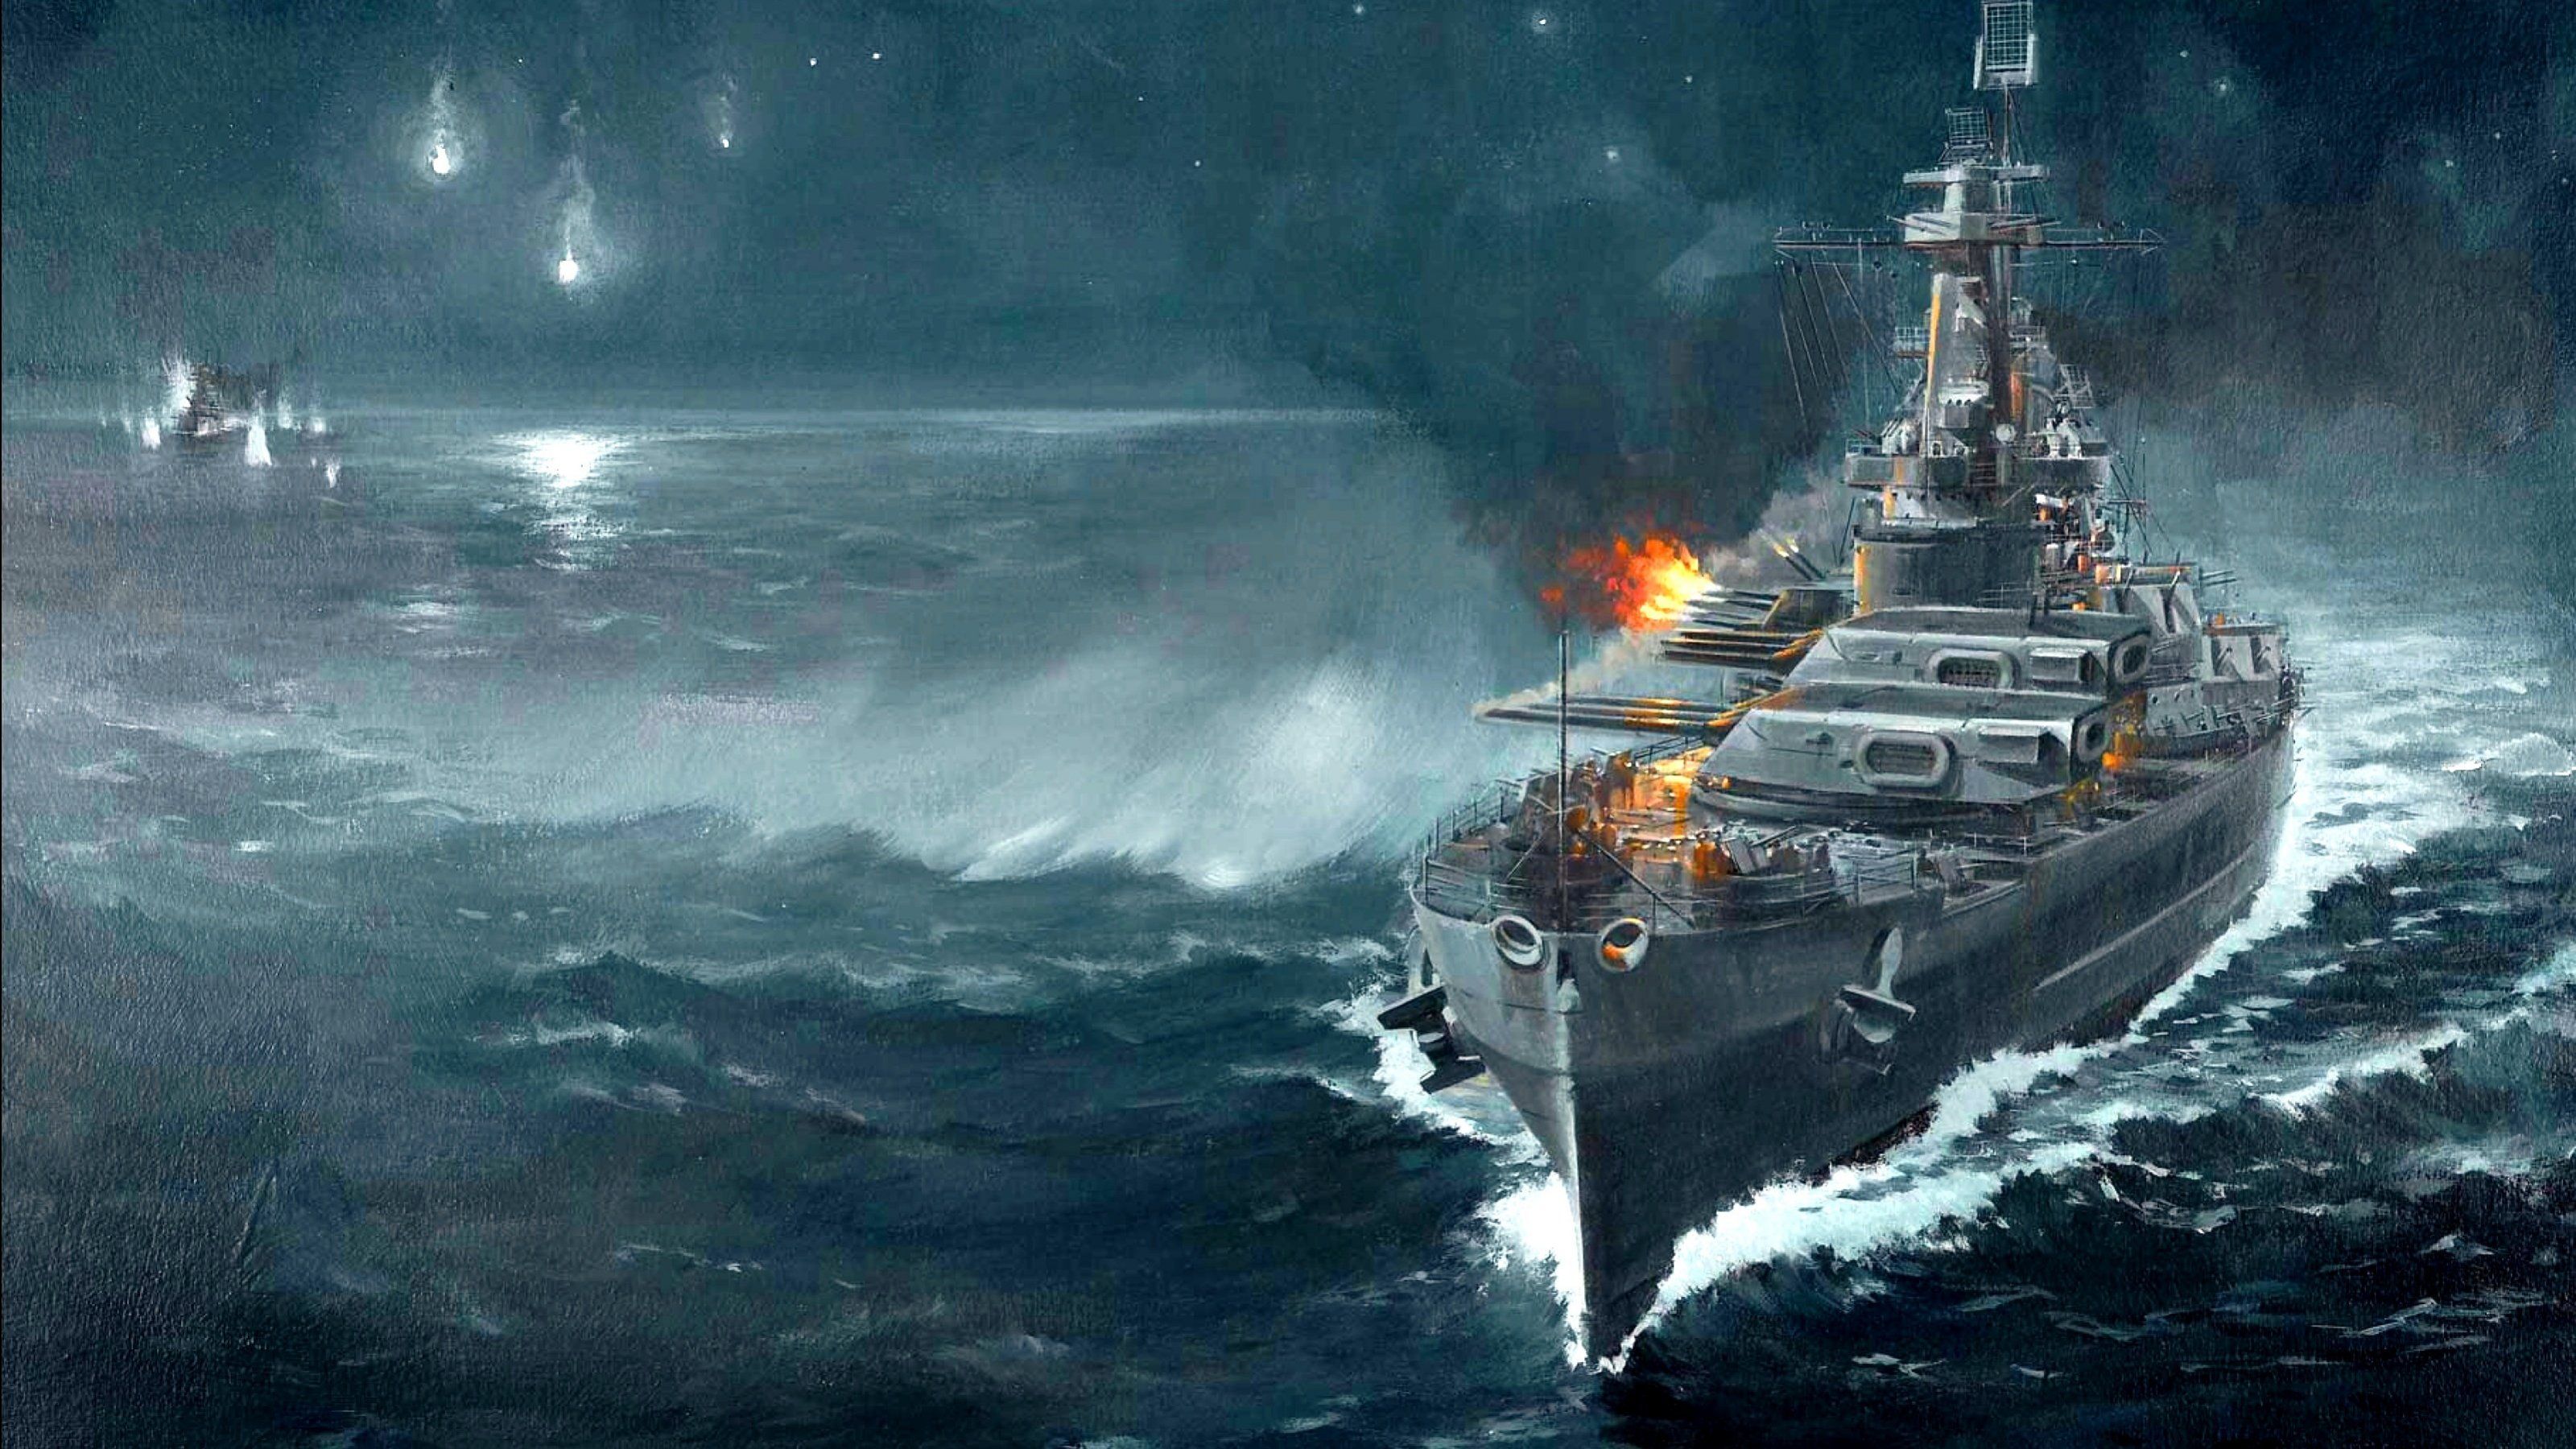 World of Warships wallpaper HD background download Facebook Covers